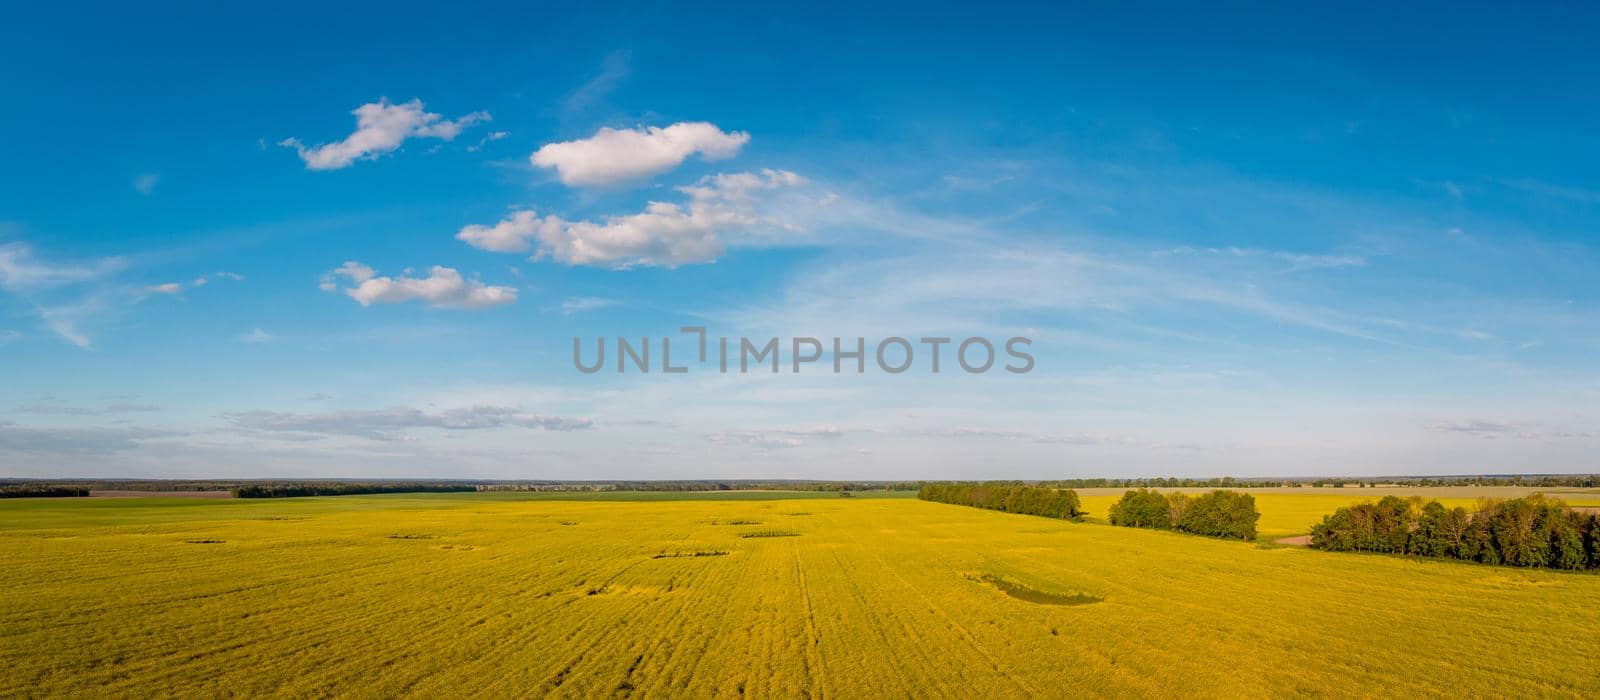 Landscape shot by the drone of agricultural field of rapeseed blooming in the countryside by VitaliiPetrushenko